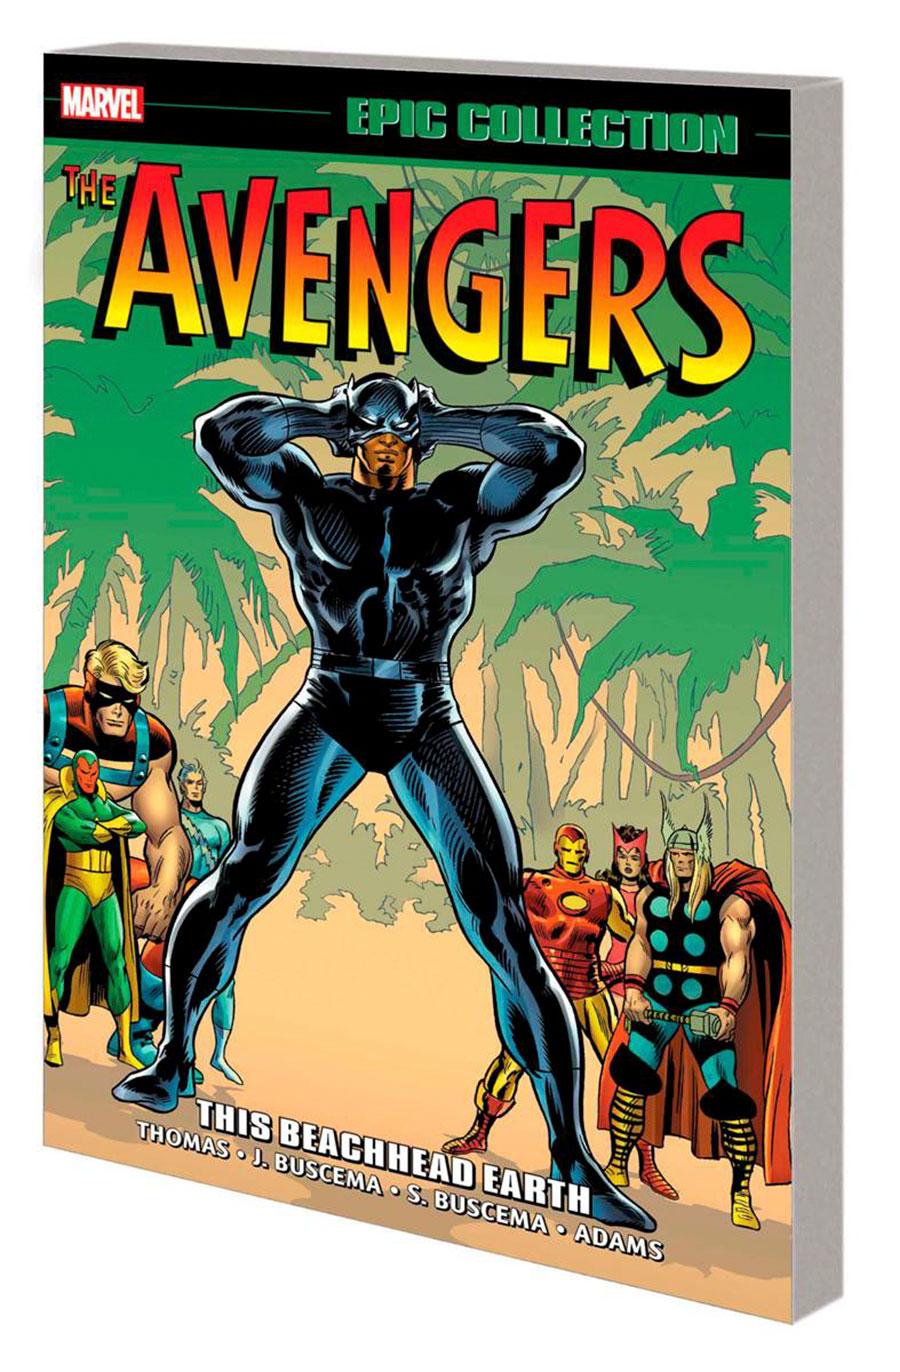 Avengers Epic Collection Vol 5 This Beachhead Earth TP New Printing